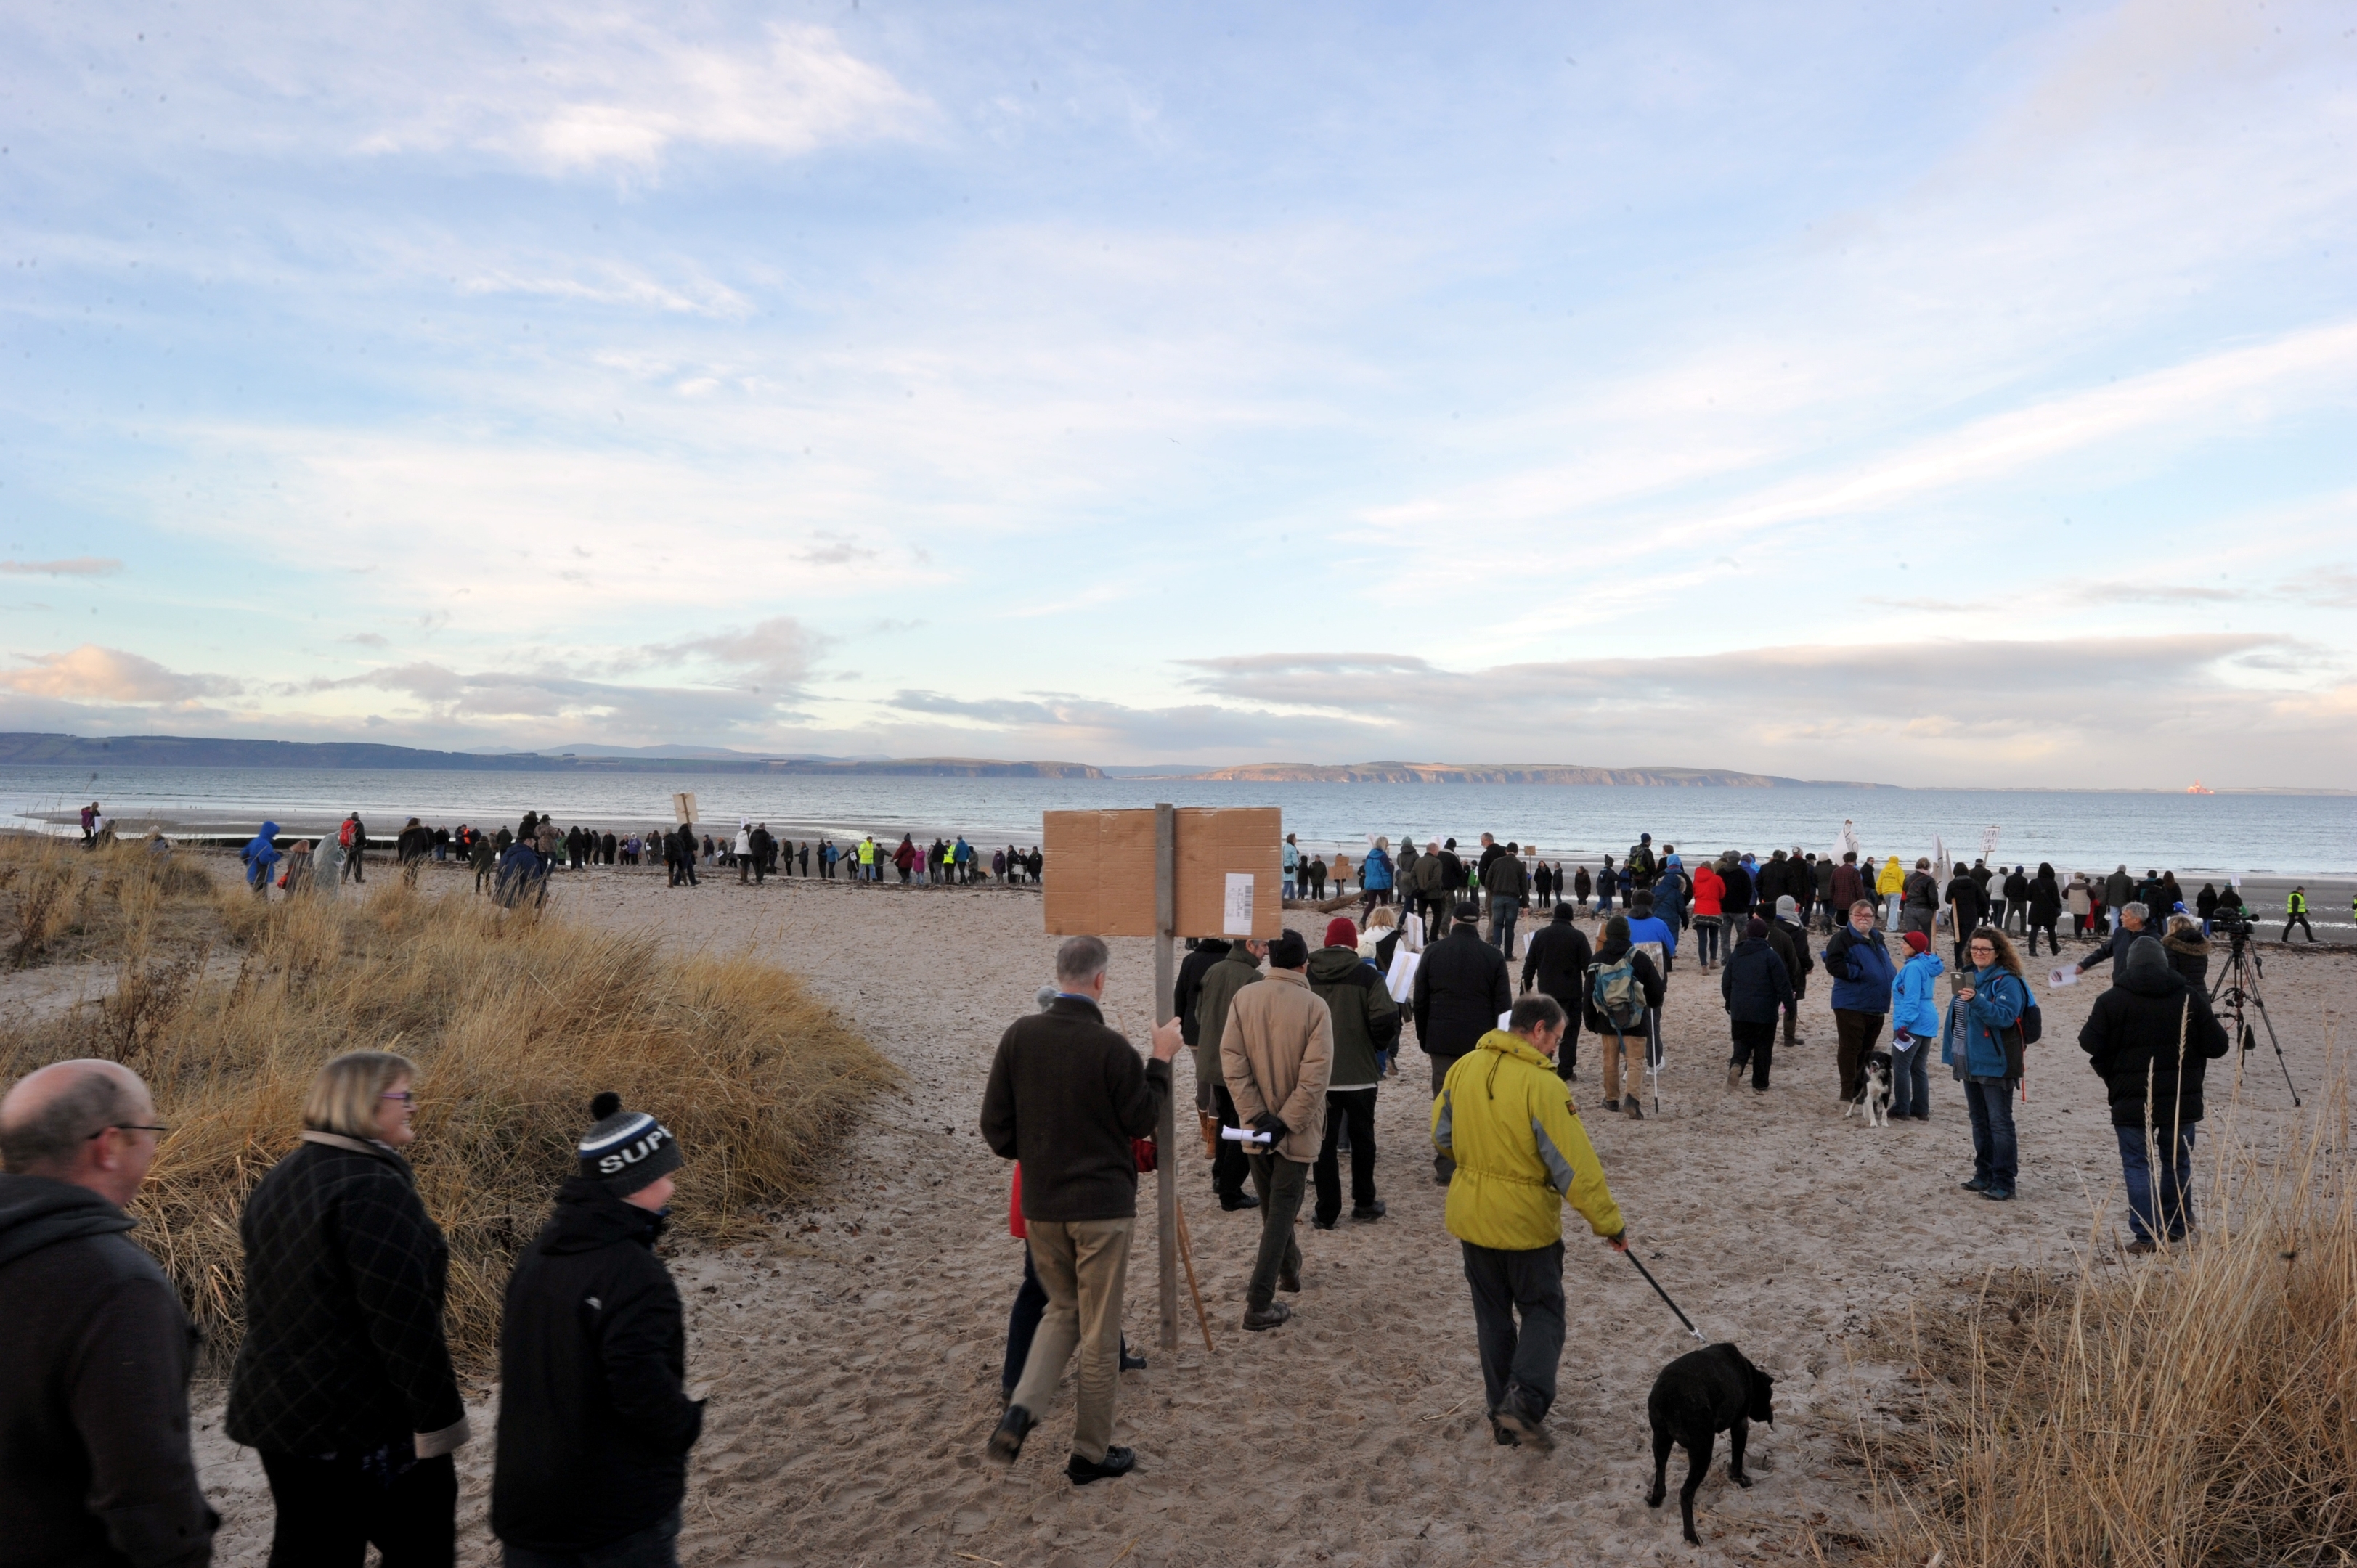 Protest at Nairn against ship to ship oil transfers in the Moray Firth.  A long line of over 500 protesters gather on the beach.